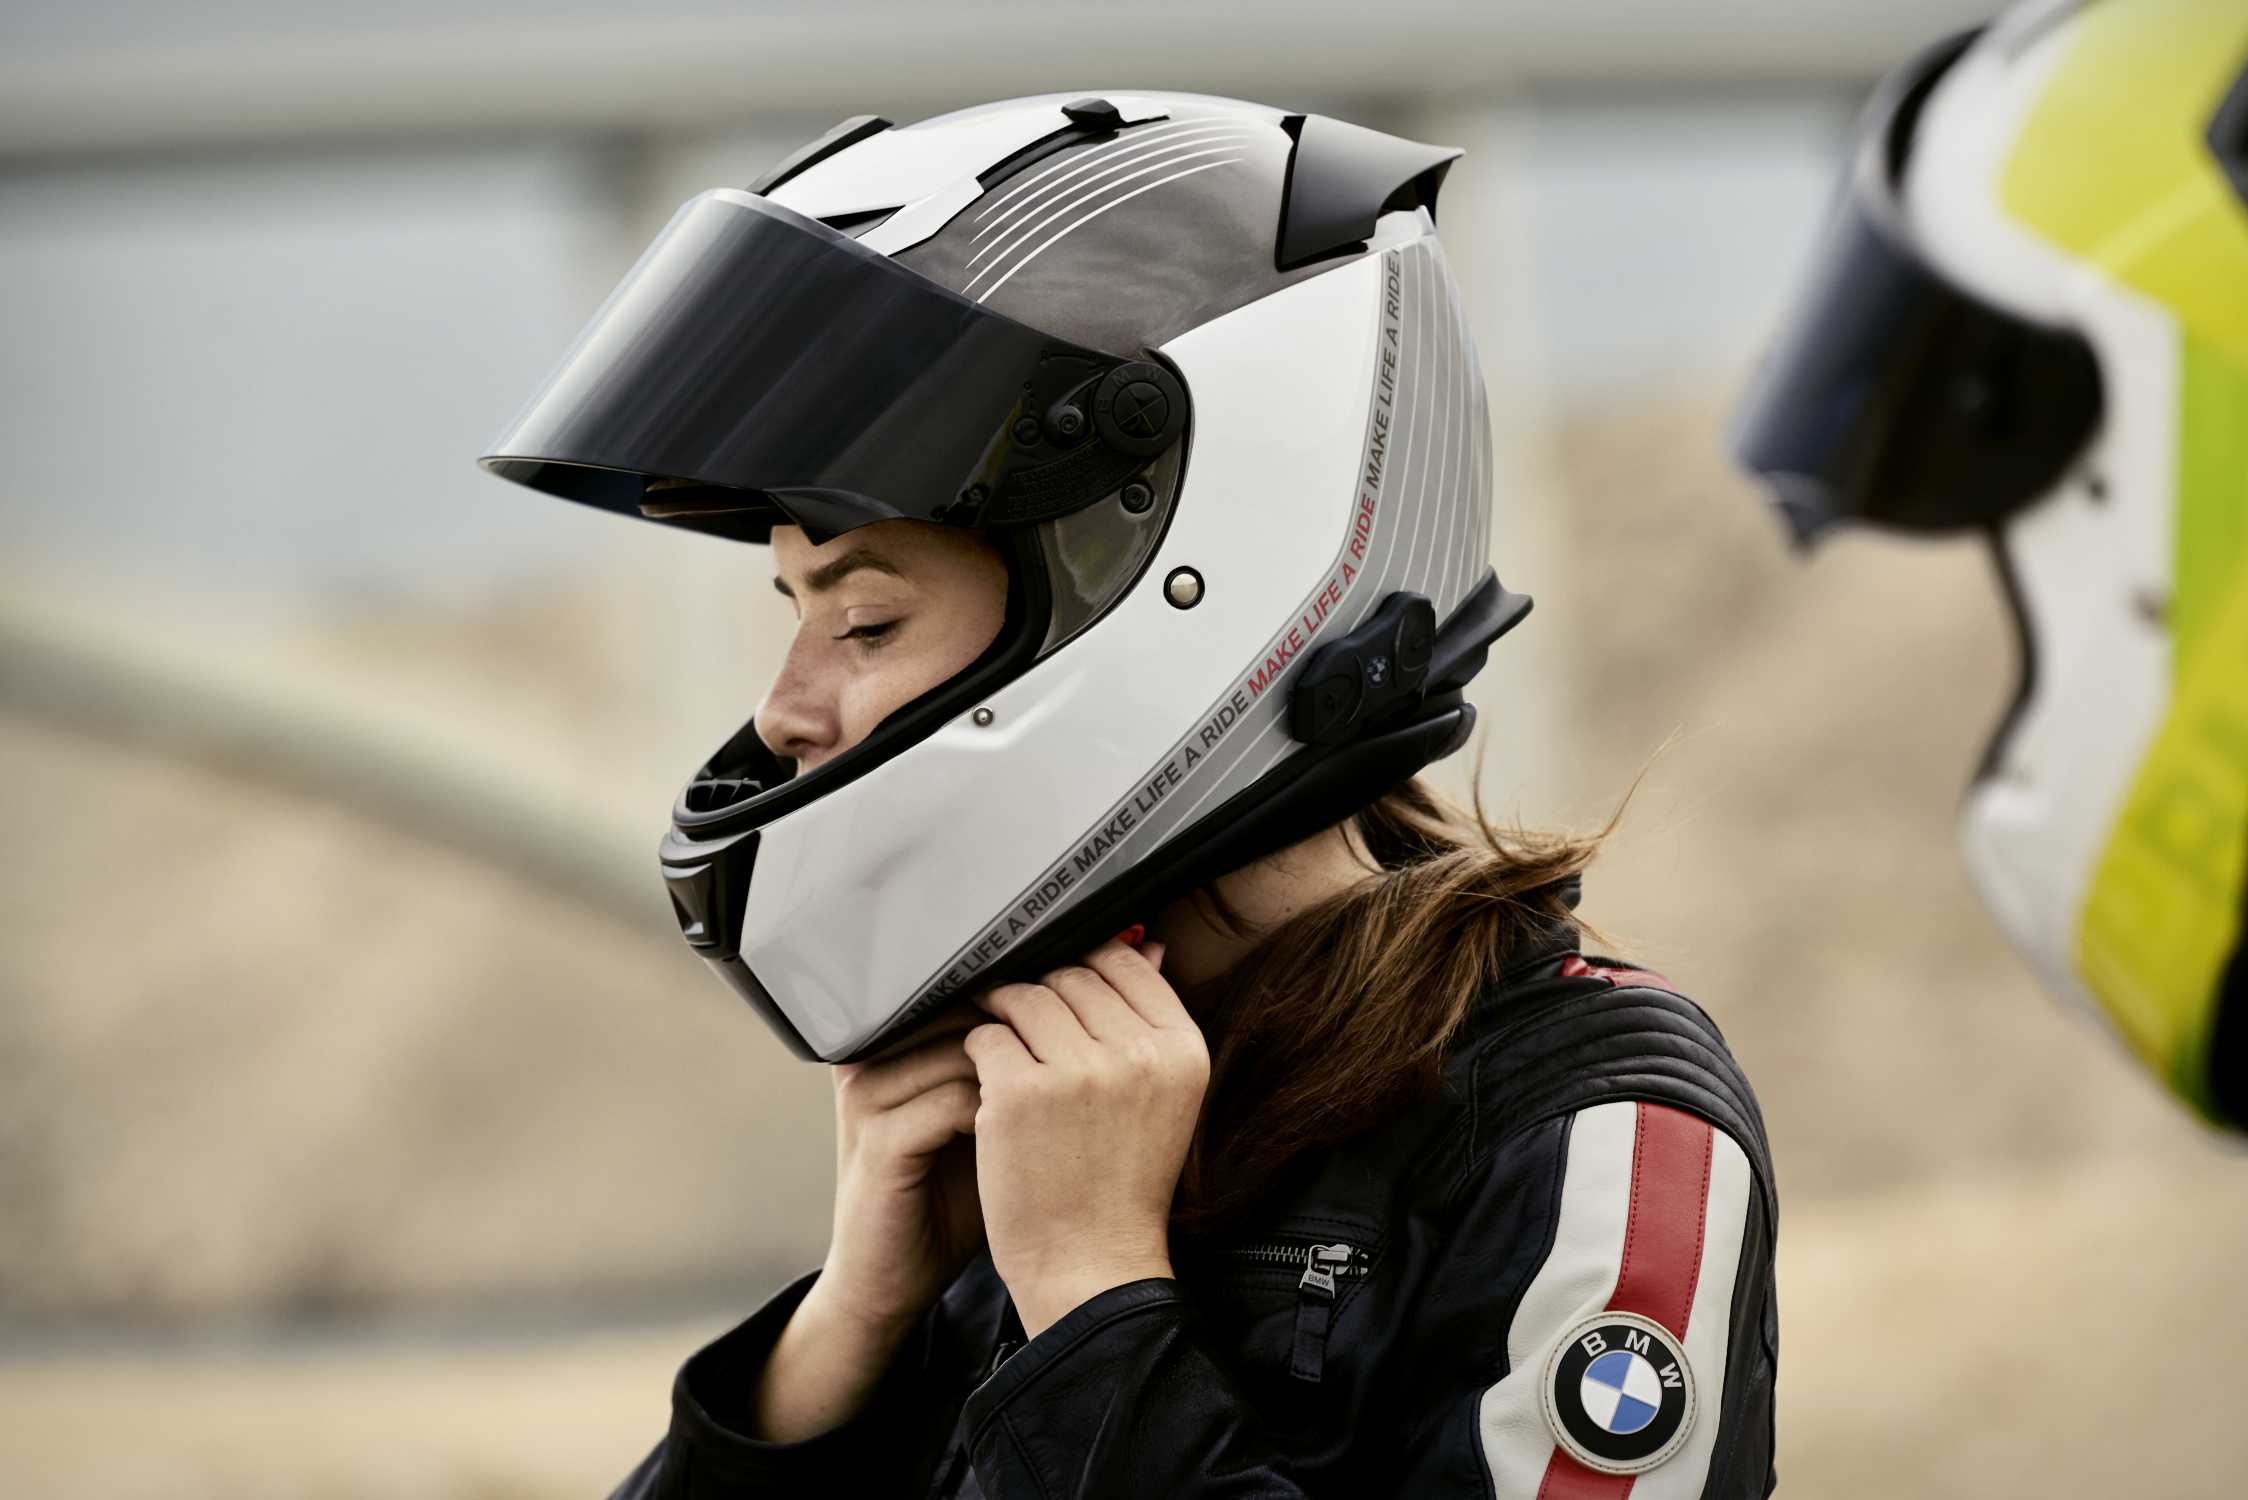 BMW Motorrad Rider Equipment 2014 Collection for Women  Woman Motorcycle  Enthusiast  MOTORESS